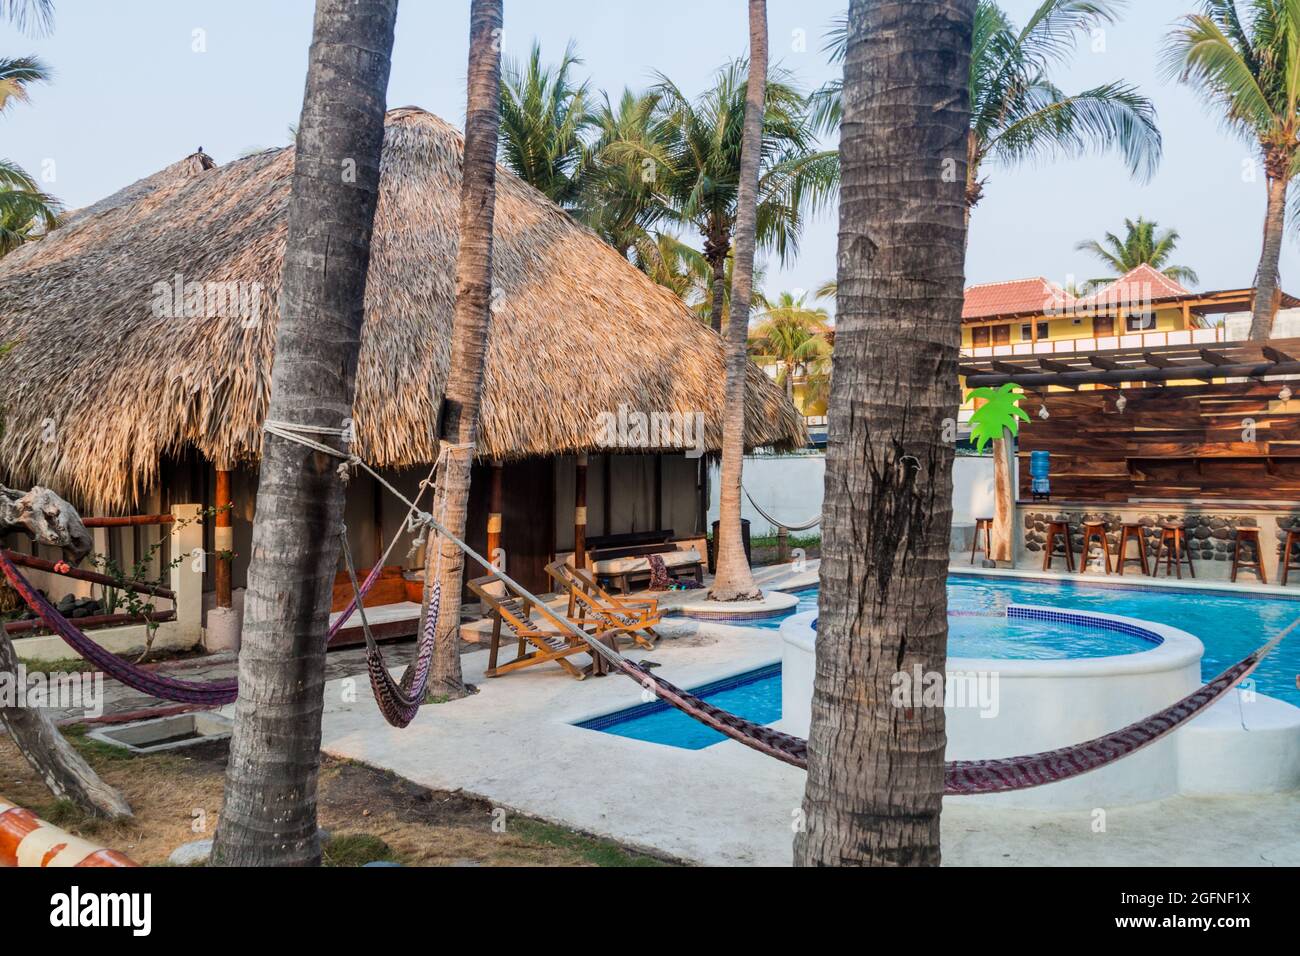 MONTERRICO, GUATEMALA - MARCH 29, 2016: Thatched hut, hammocks and a pool in Johnny's Place hotel in Monterrico village. Stock Photo